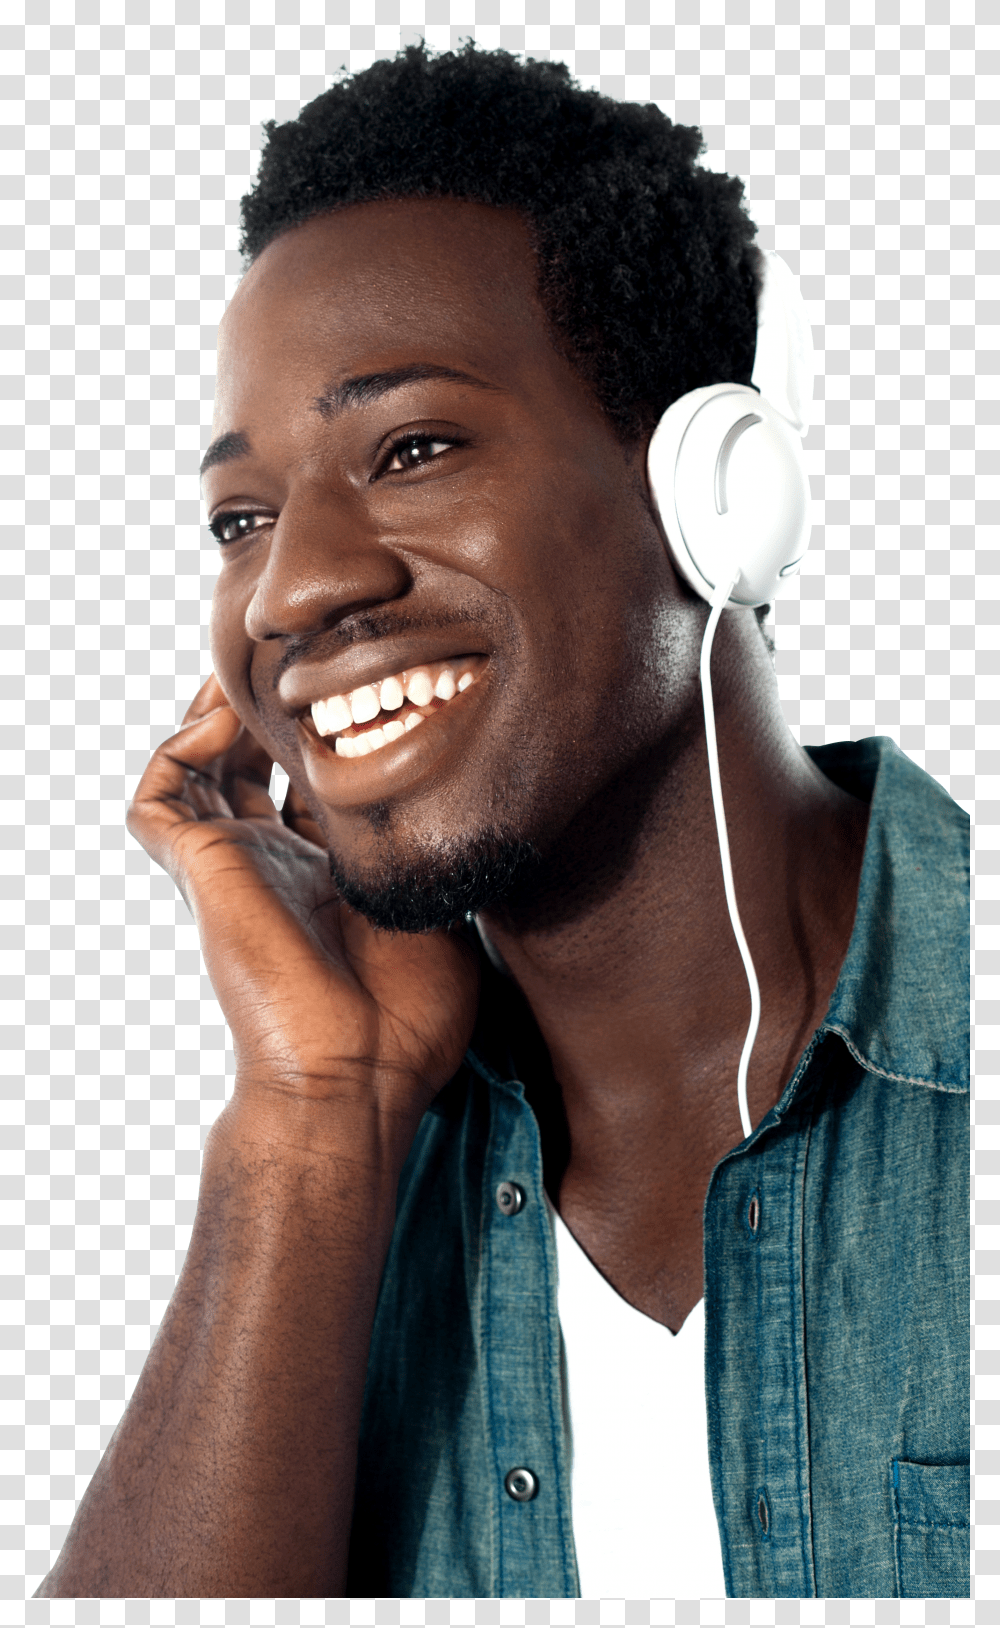 Listening Music Images Background Play Music Listening With Headphones Photo Hd Transparent Png